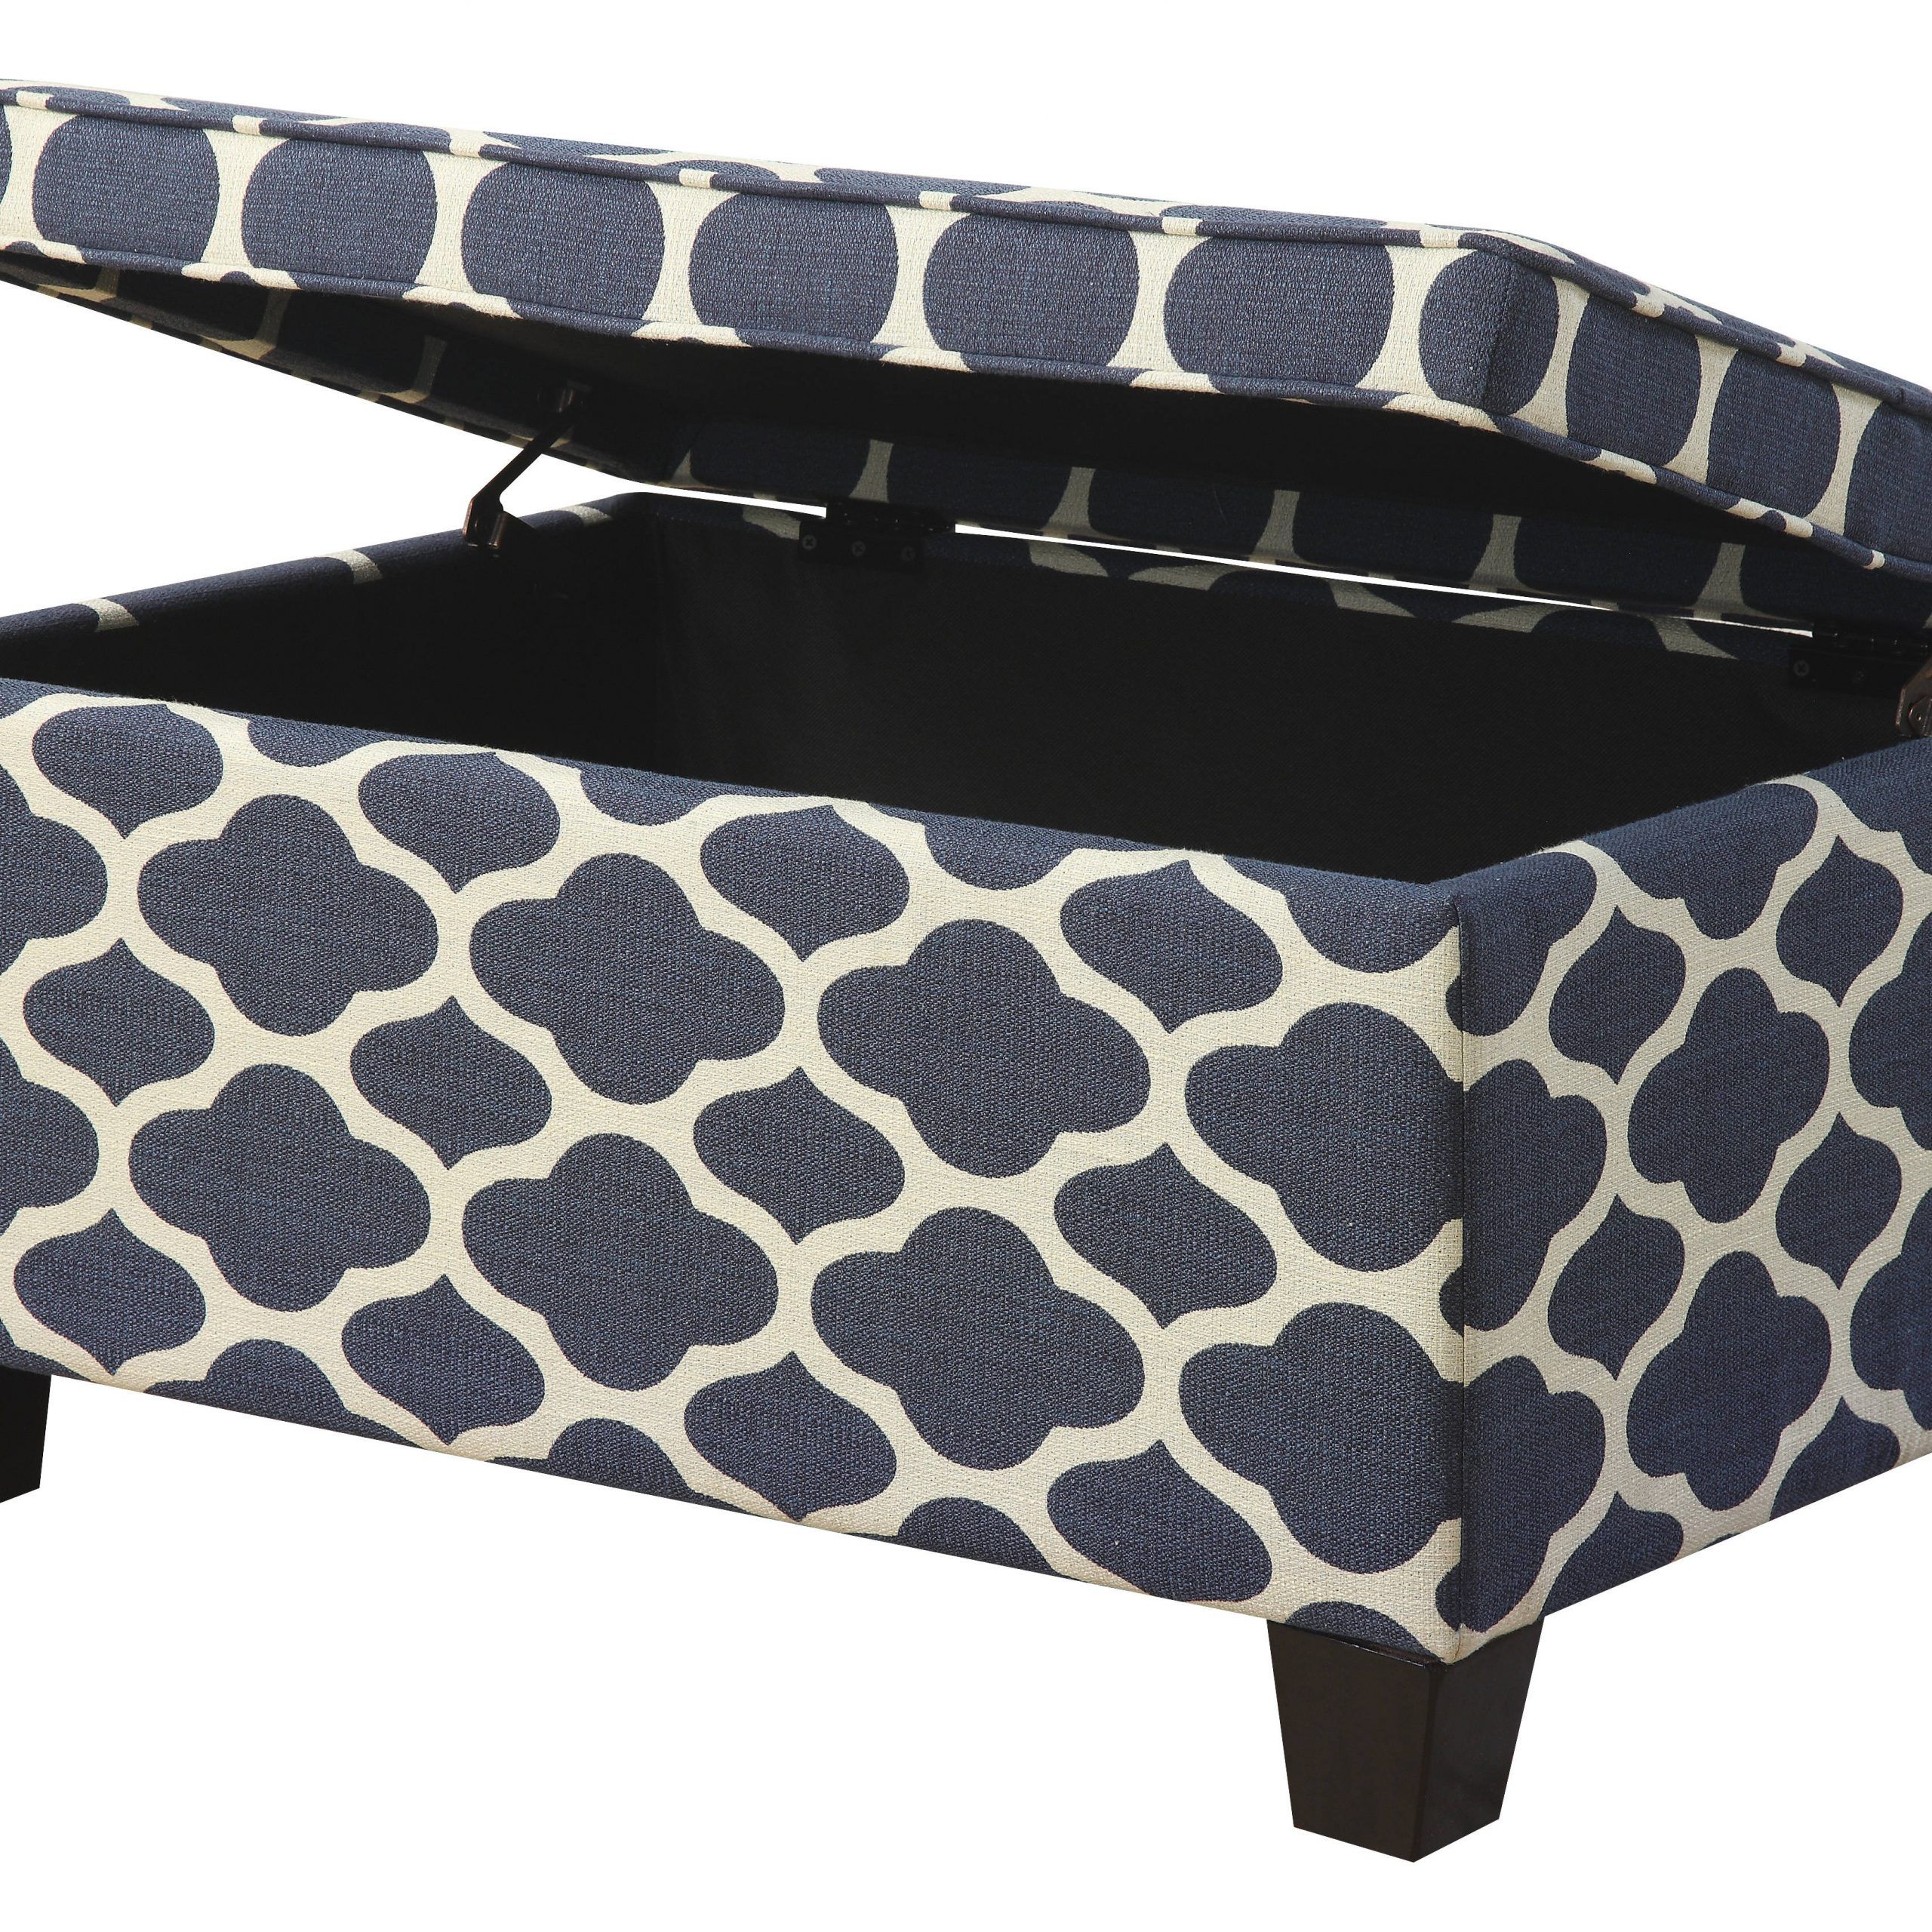 Jessa Contemporary Blue Wood Fabric Upholstered Storage Ottoman | The Intended For Blue Fabric Storage Ottomans (View 13 of 20)